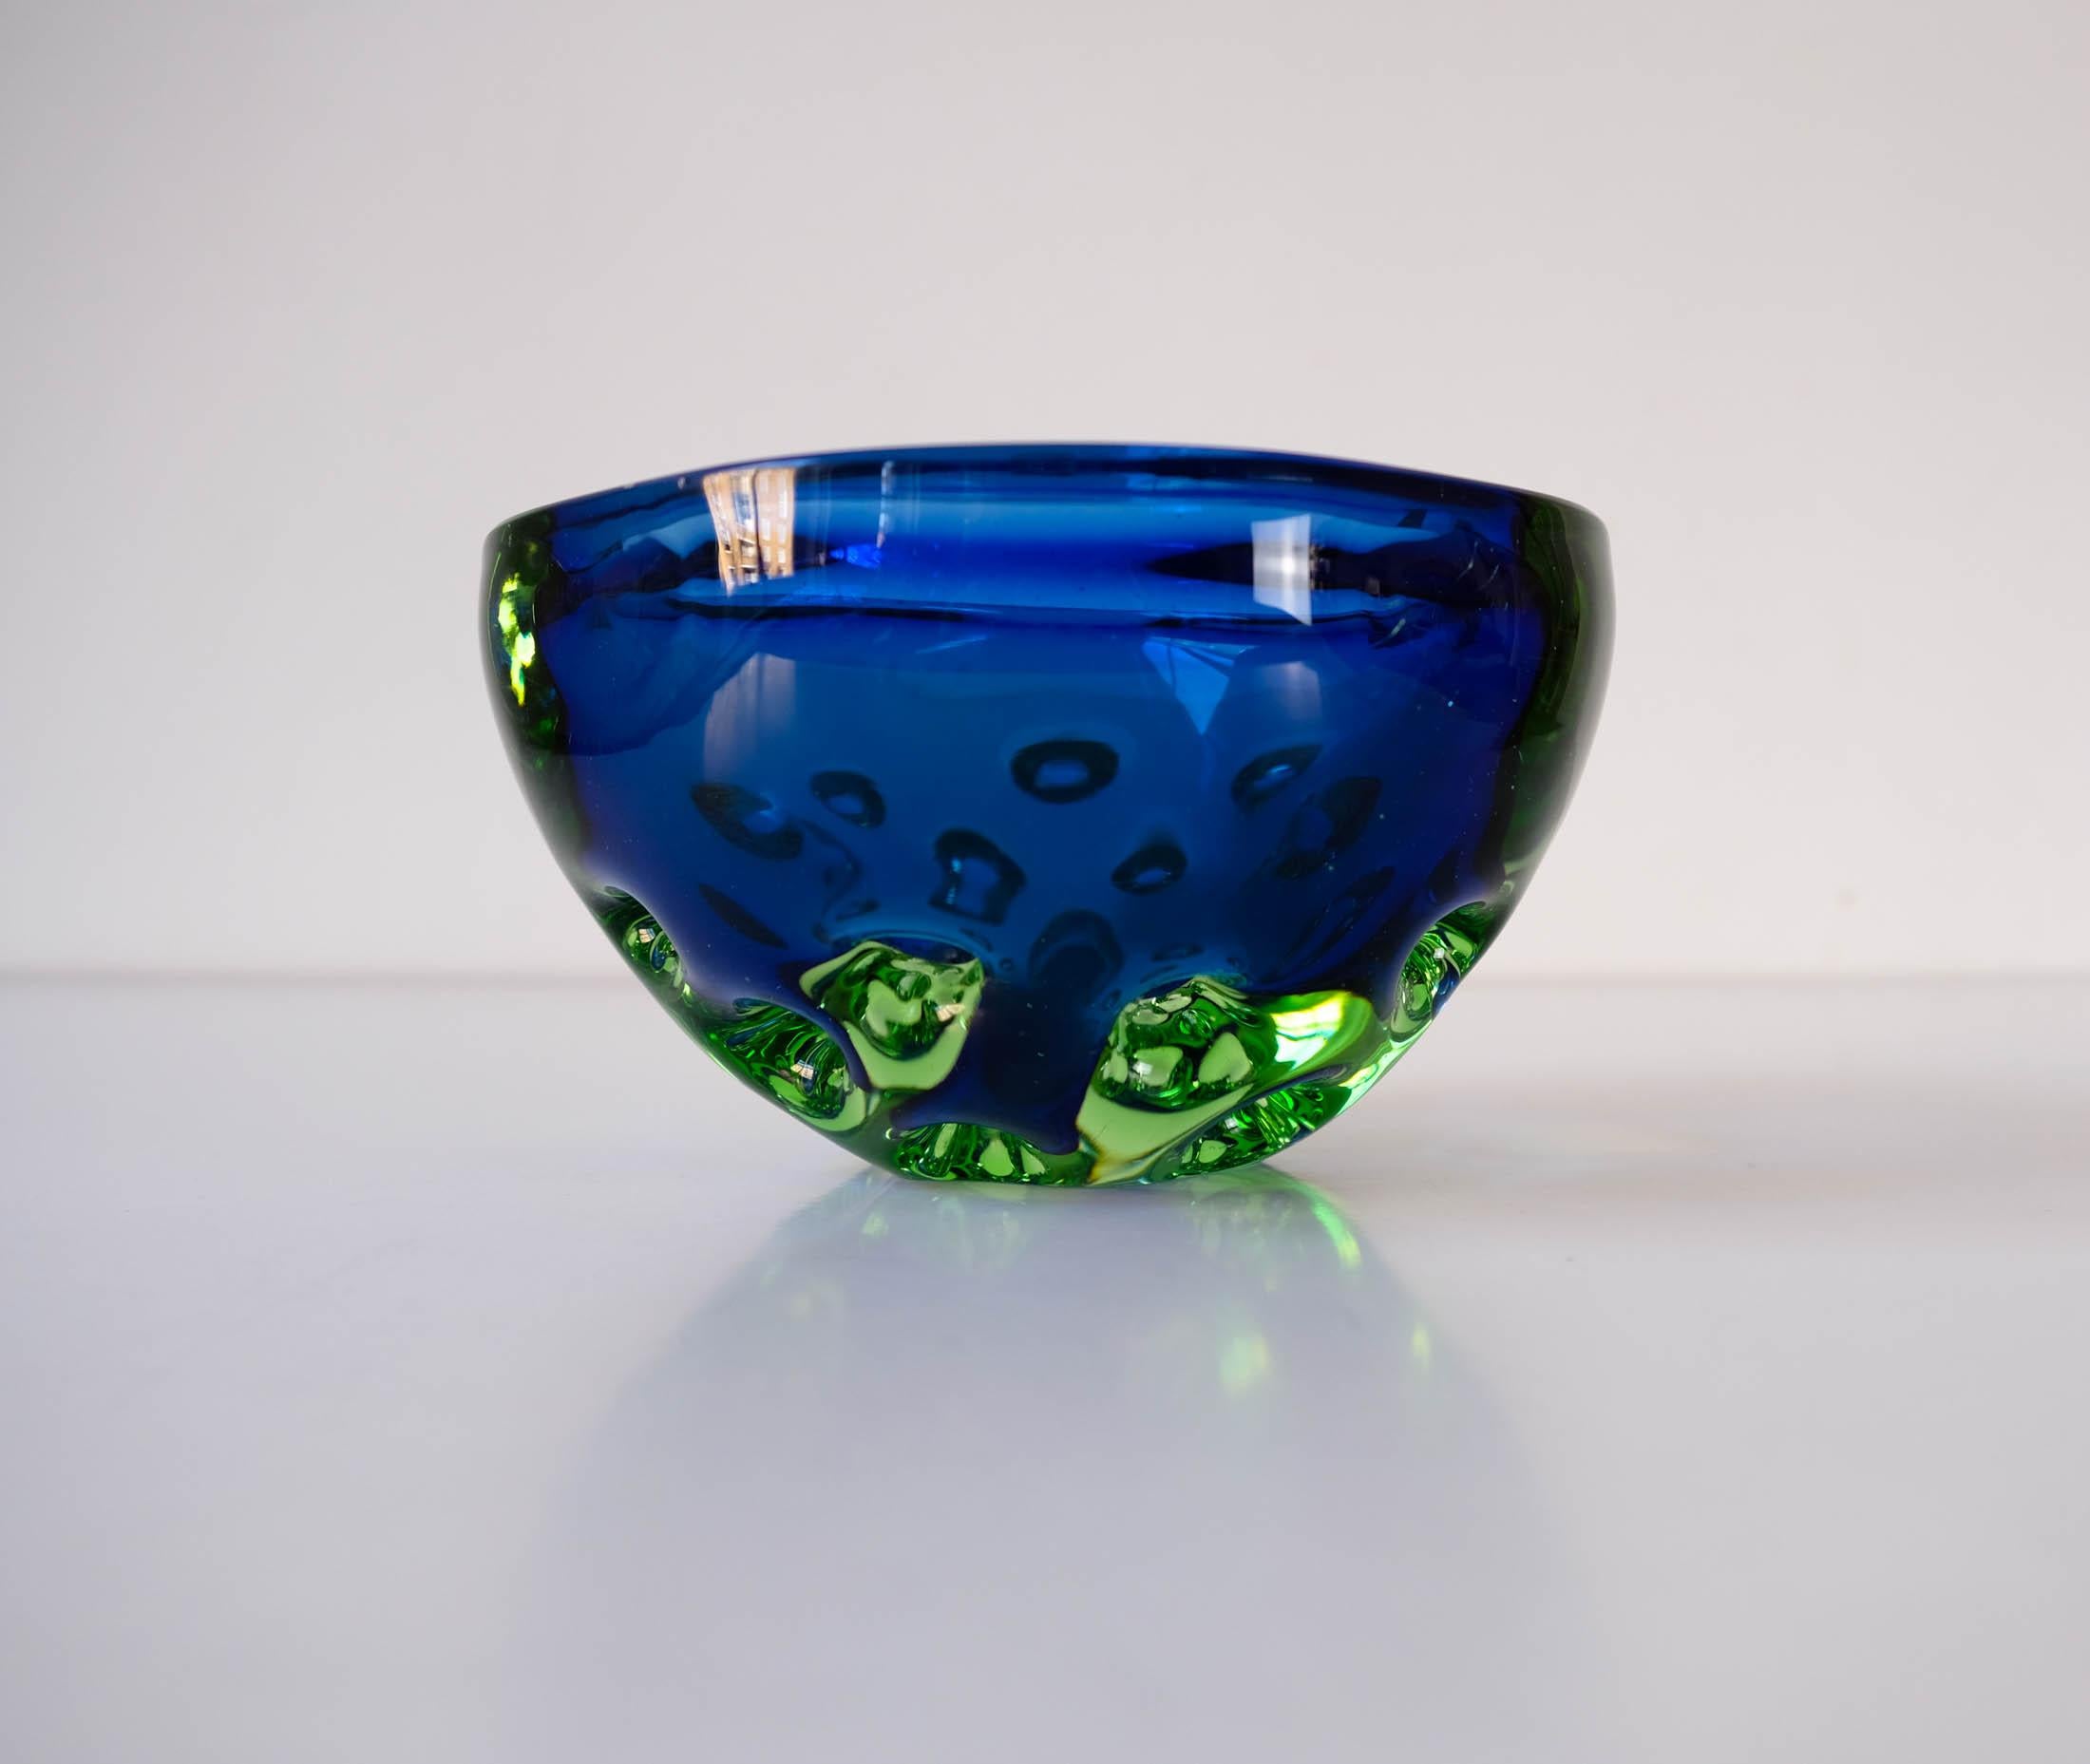 For sale a Mid-Century Sommerso blue & green Murano dimpled Geode vide poche/catch-all Bowl by Galliano Ferro, Italy circa 1960s.

This gorgeous bowl is in good vintage condition, with some minor marks and scratches commensurate with 50+ years of